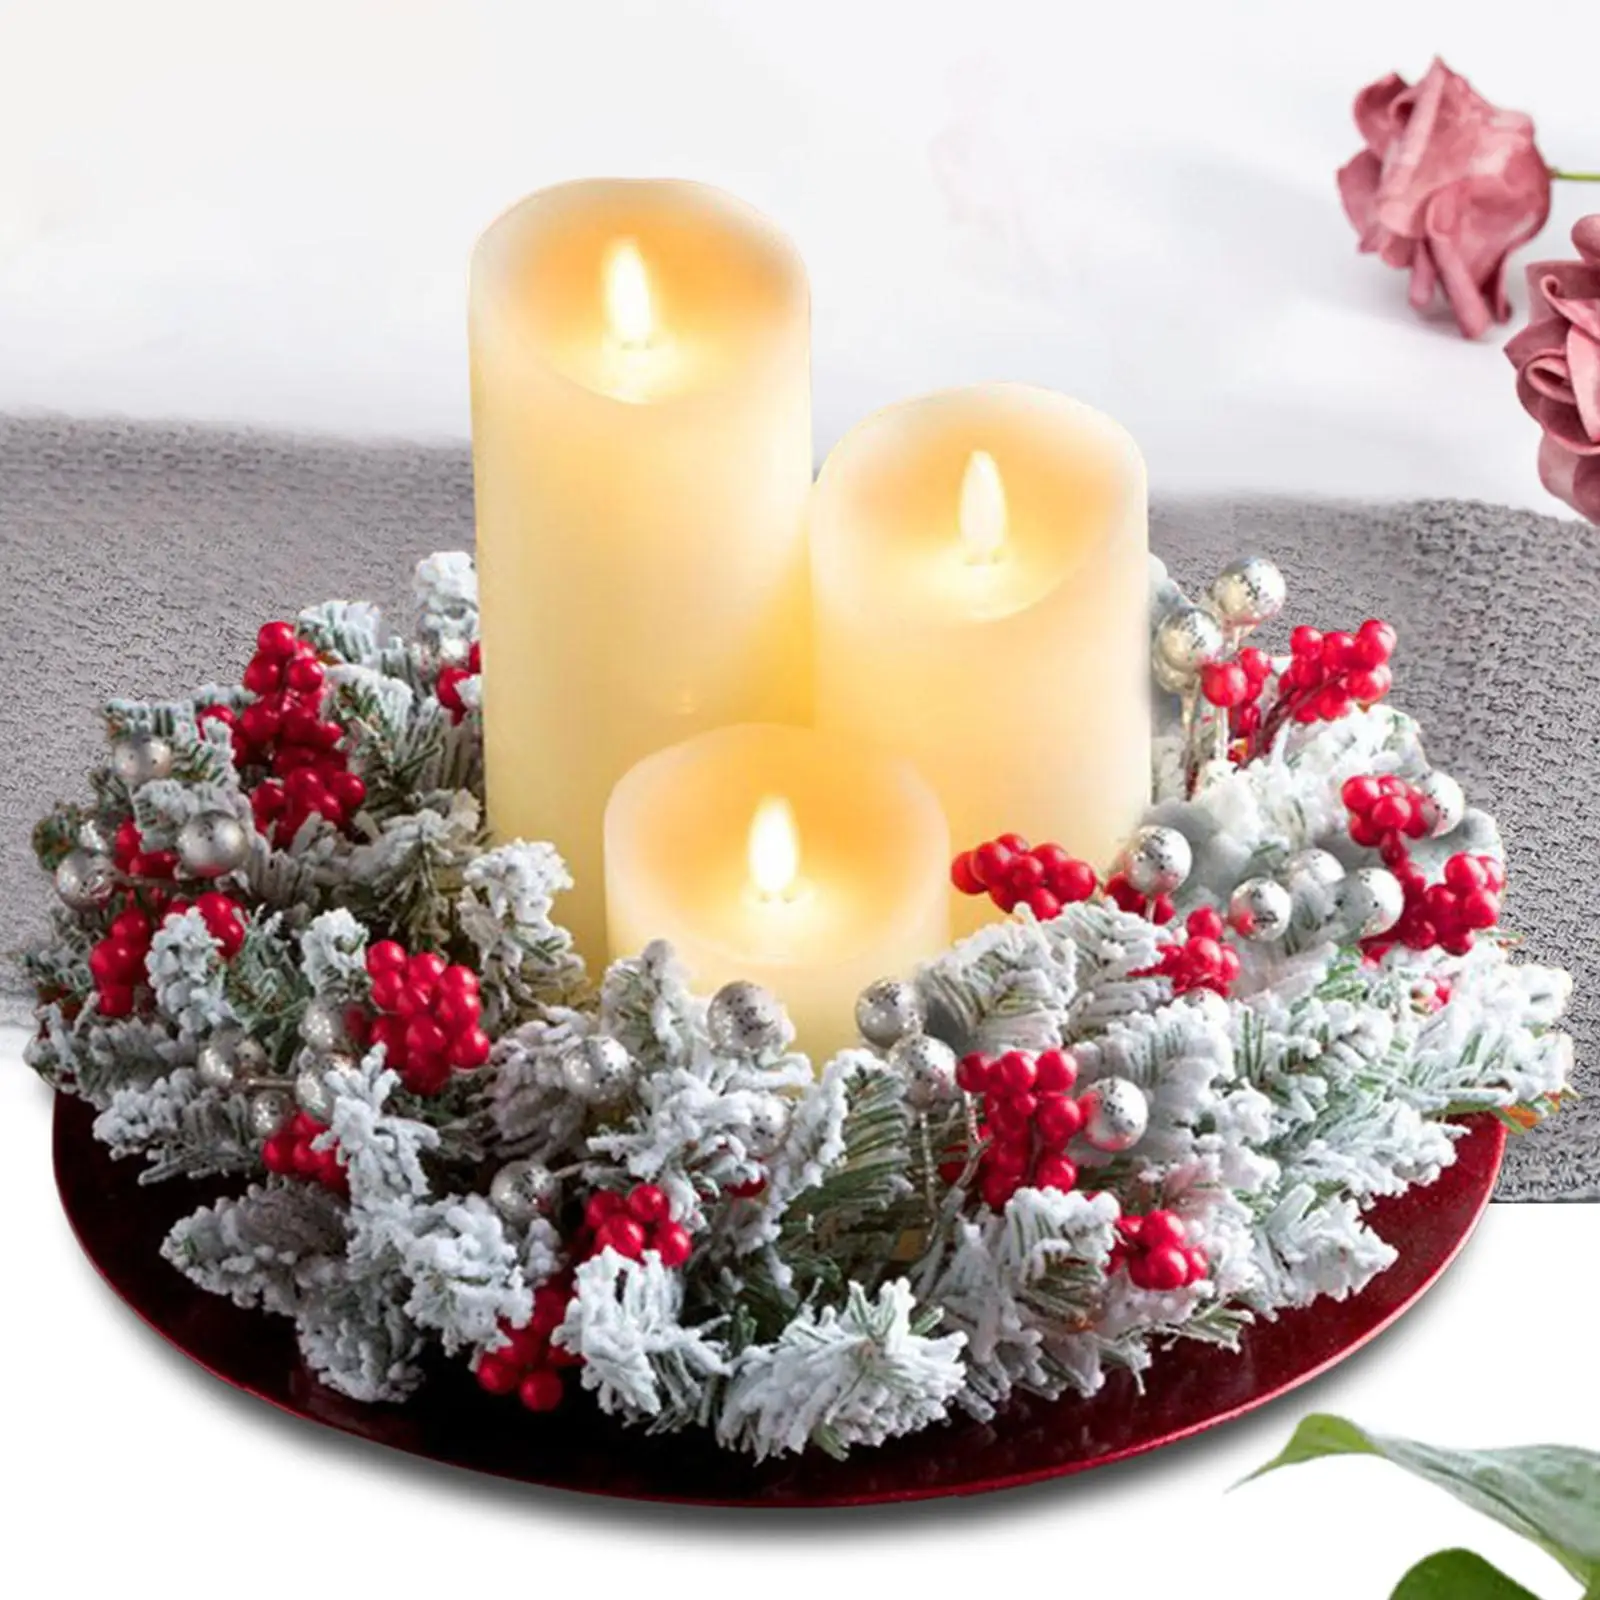 Christmas Candle Wreath Candles Holder Creative Rustic Garland Wreath for Table Centerpiece Xmas Fireplace Holiday Thanksgiving